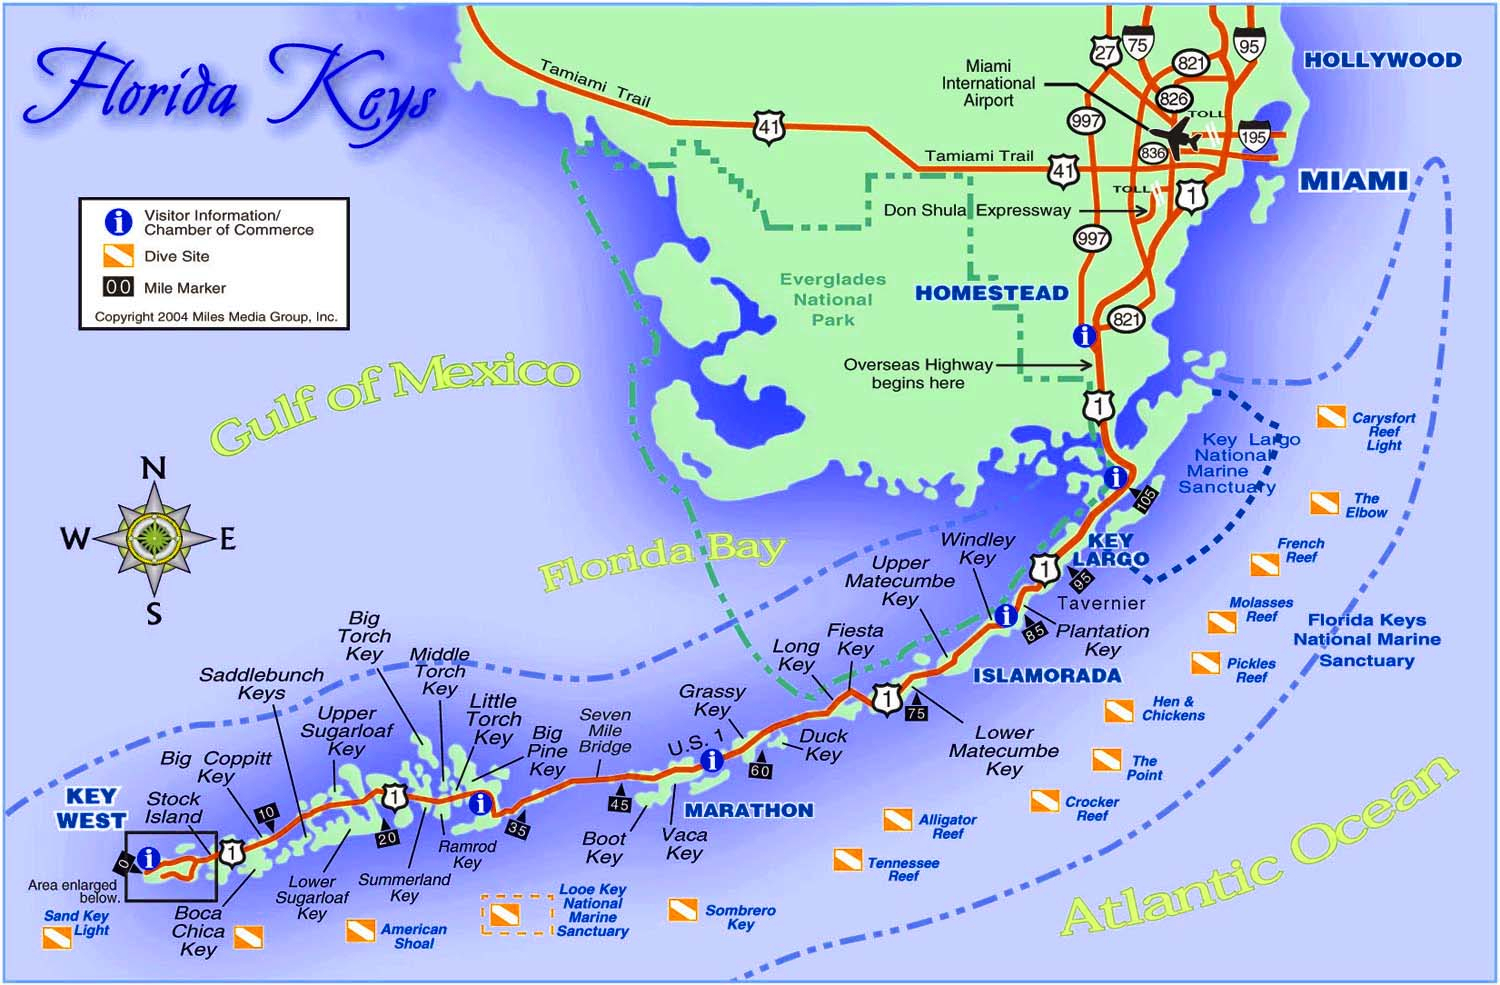 Best Florida Keys Beaches Map And Information - Florida Keys - Map Of Florida Keys And Miami